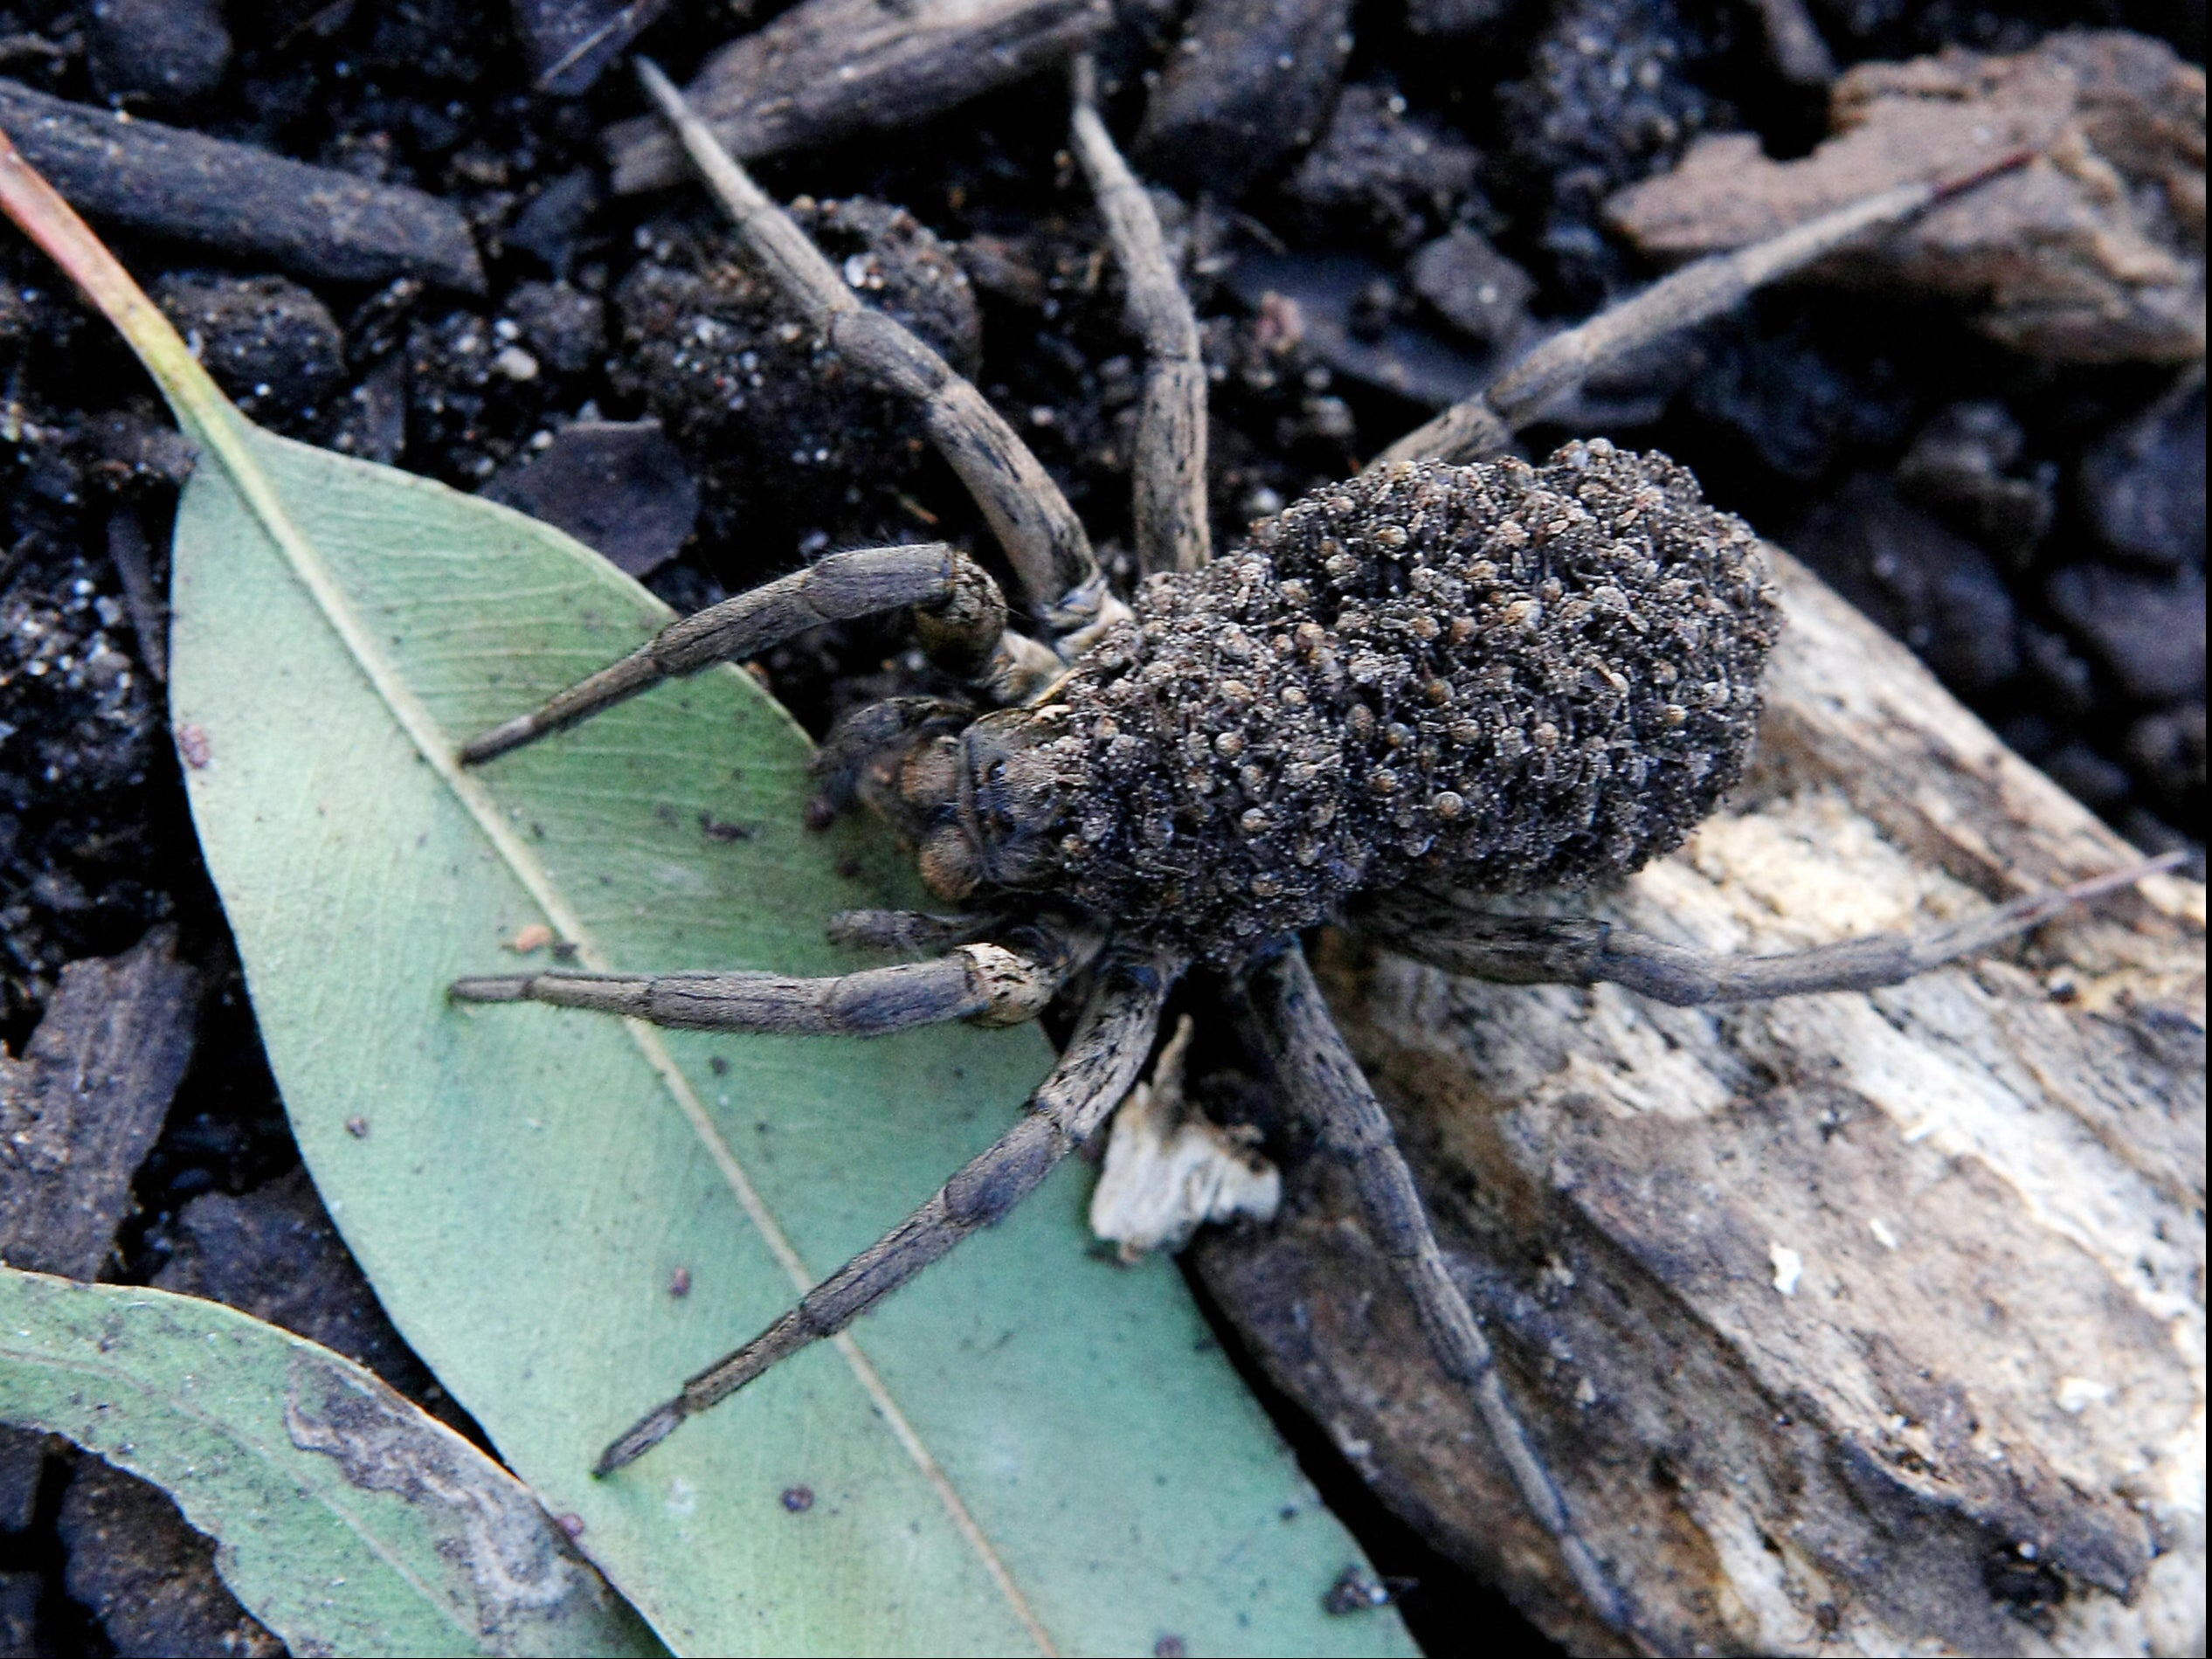 A garden wolf spider carries her brood of over 100 babies on her back for protection